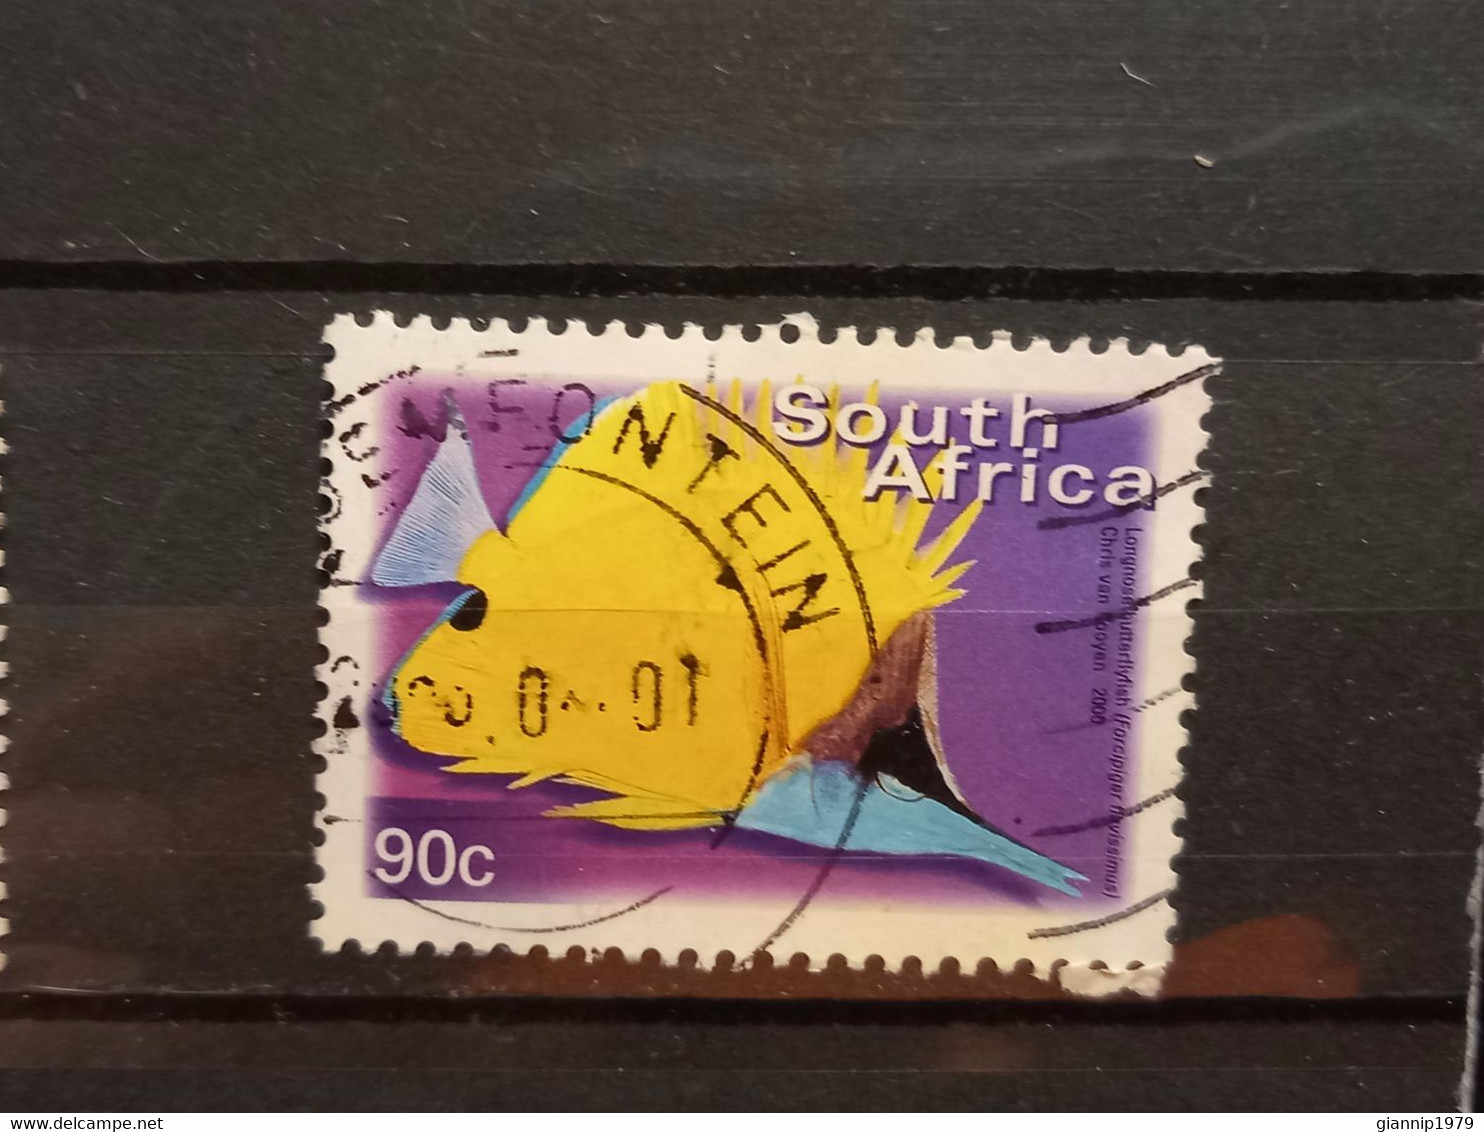 FRANCOBOLLI STAMPS SUD AFRICA SOUTH SUID 2000 USED SERIE PESCI FISH OBLITERE' - Oblitérés